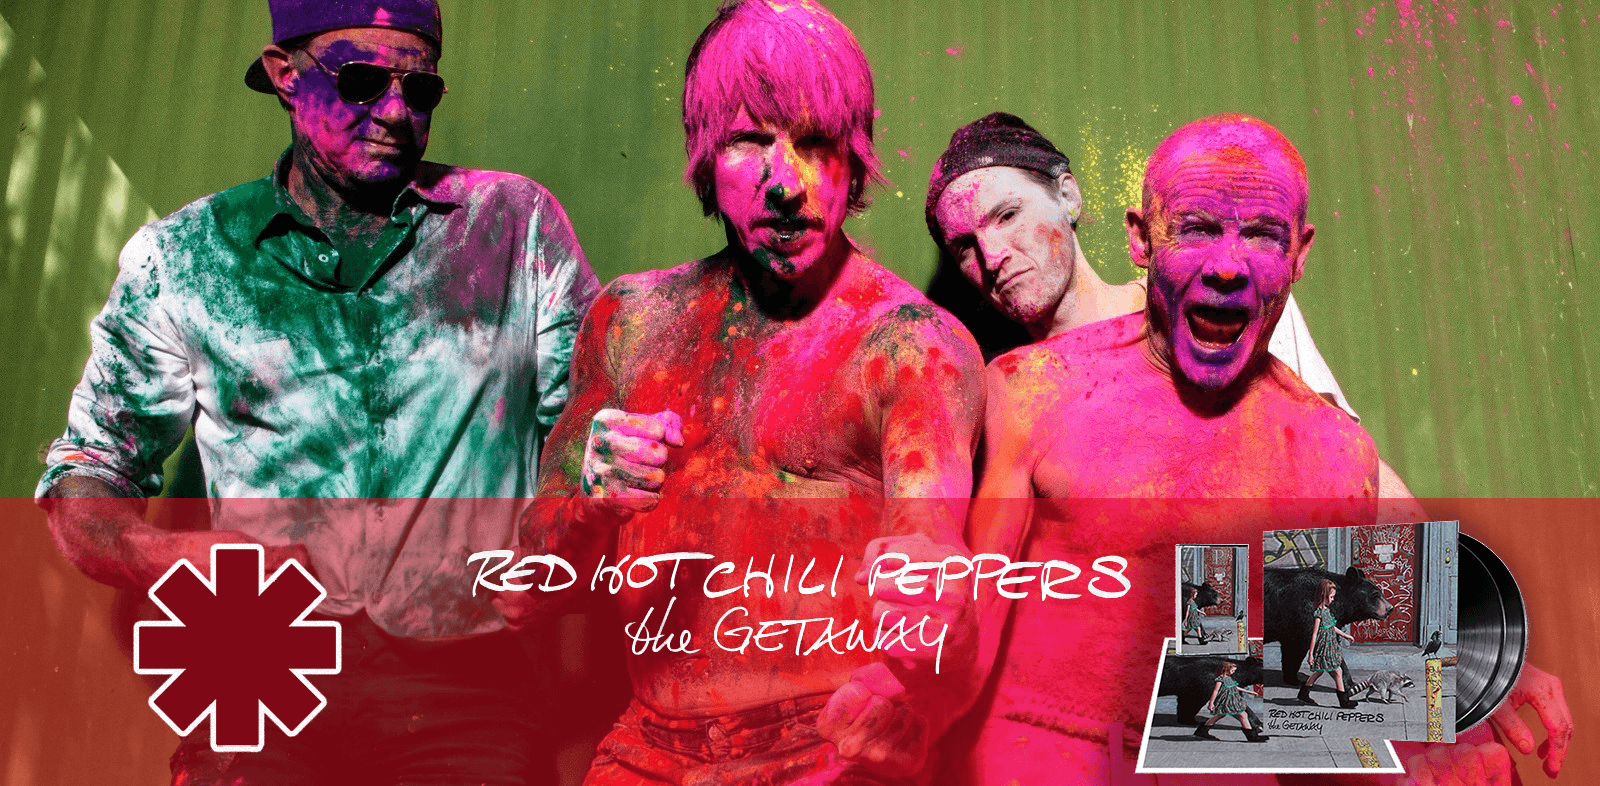 Download our Chili Peppers wallpaper for the new album. RHCP.us